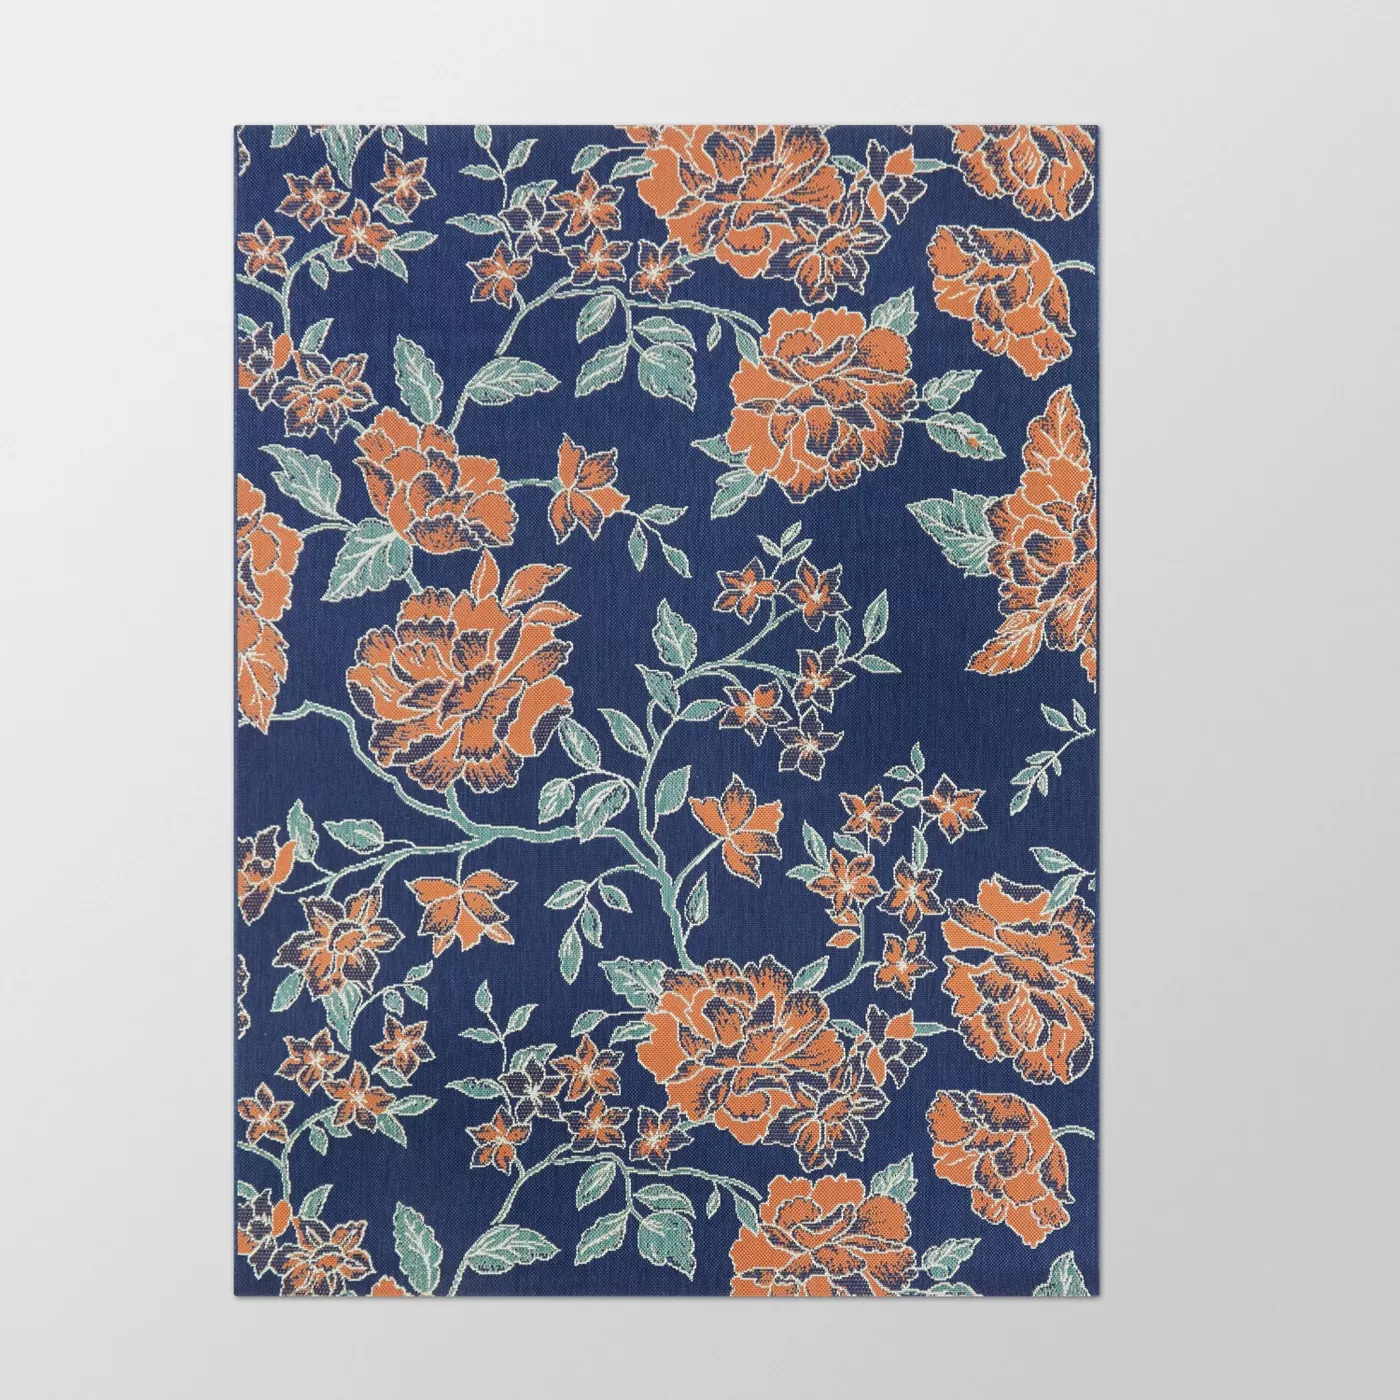 Floral Outdoor Rug - Threshold™ - image 1 of 2